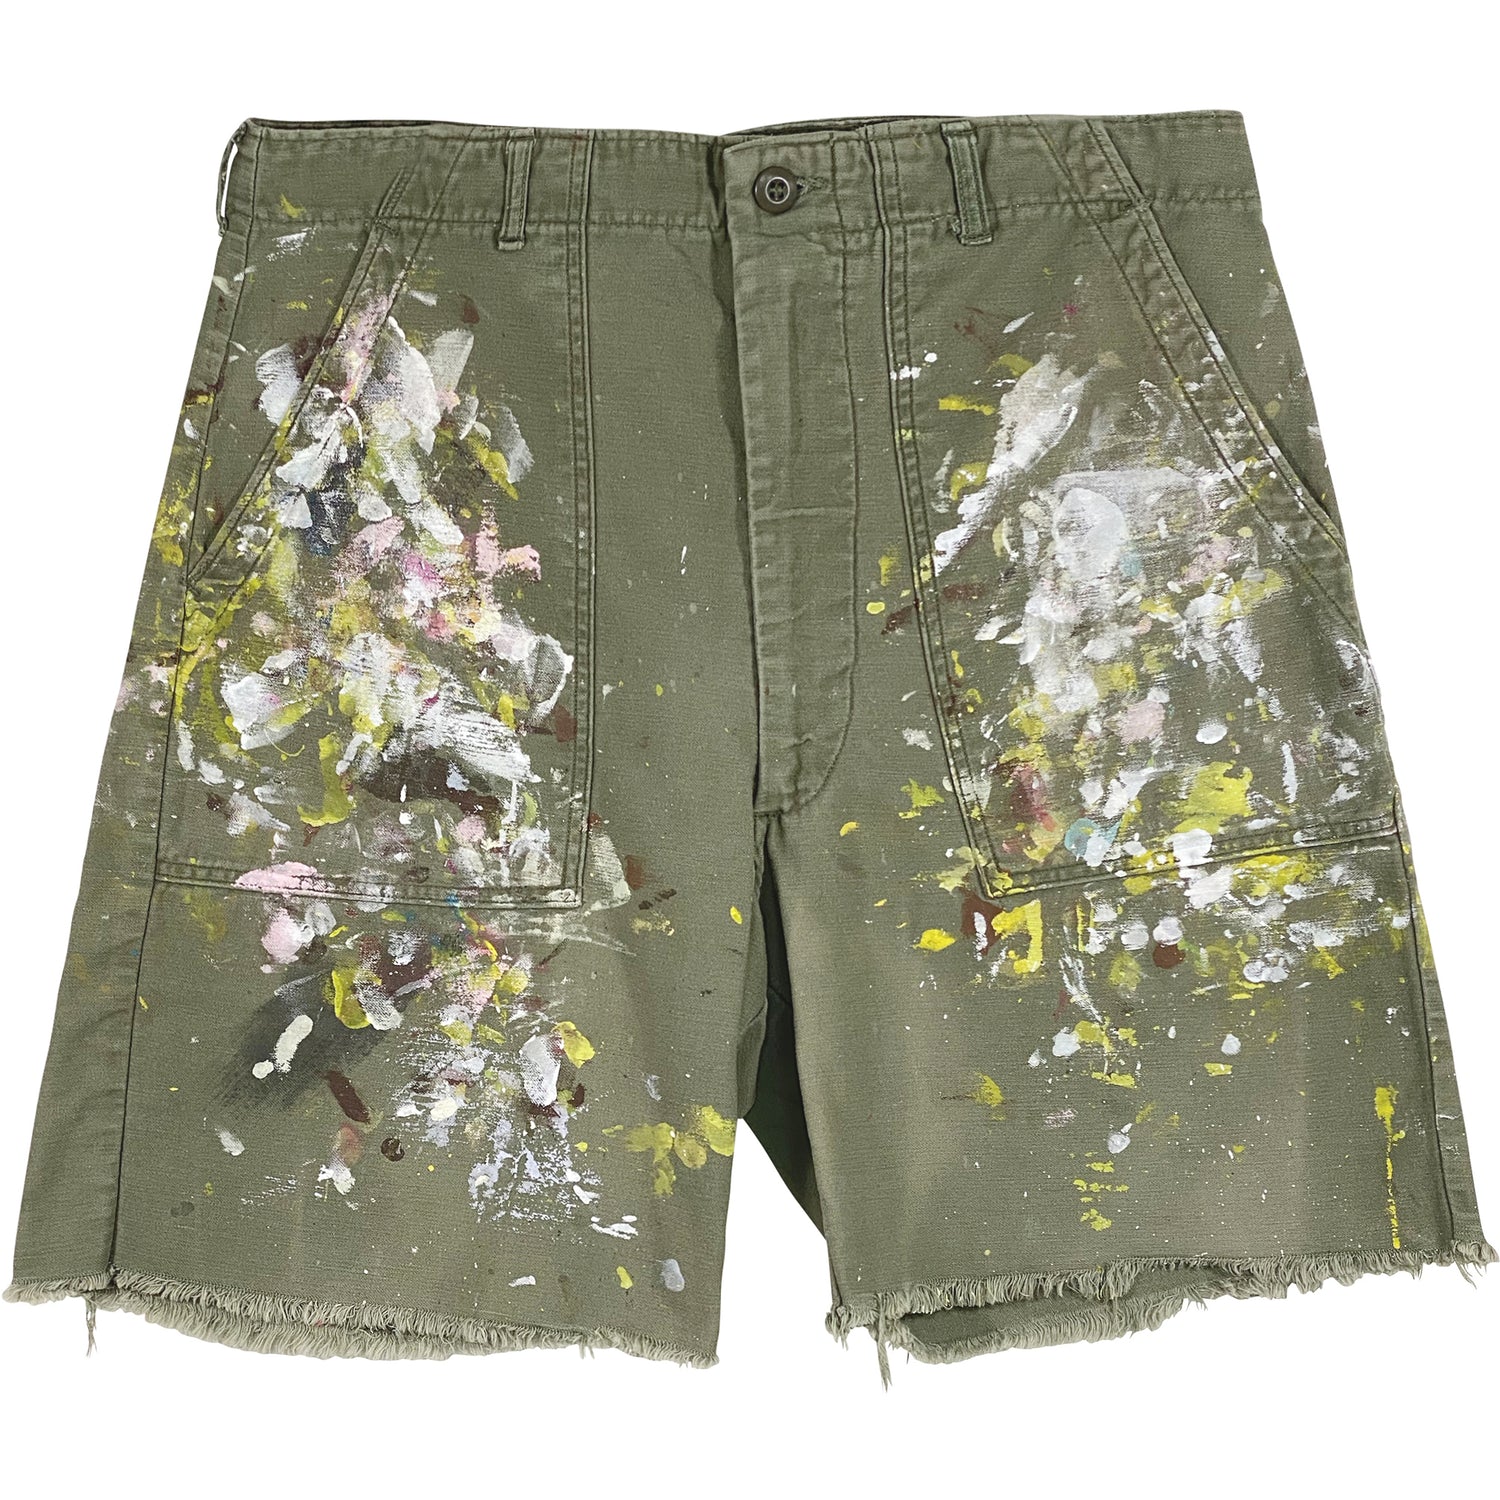 VINTAGE ARMY SHORTS WITH PAINT